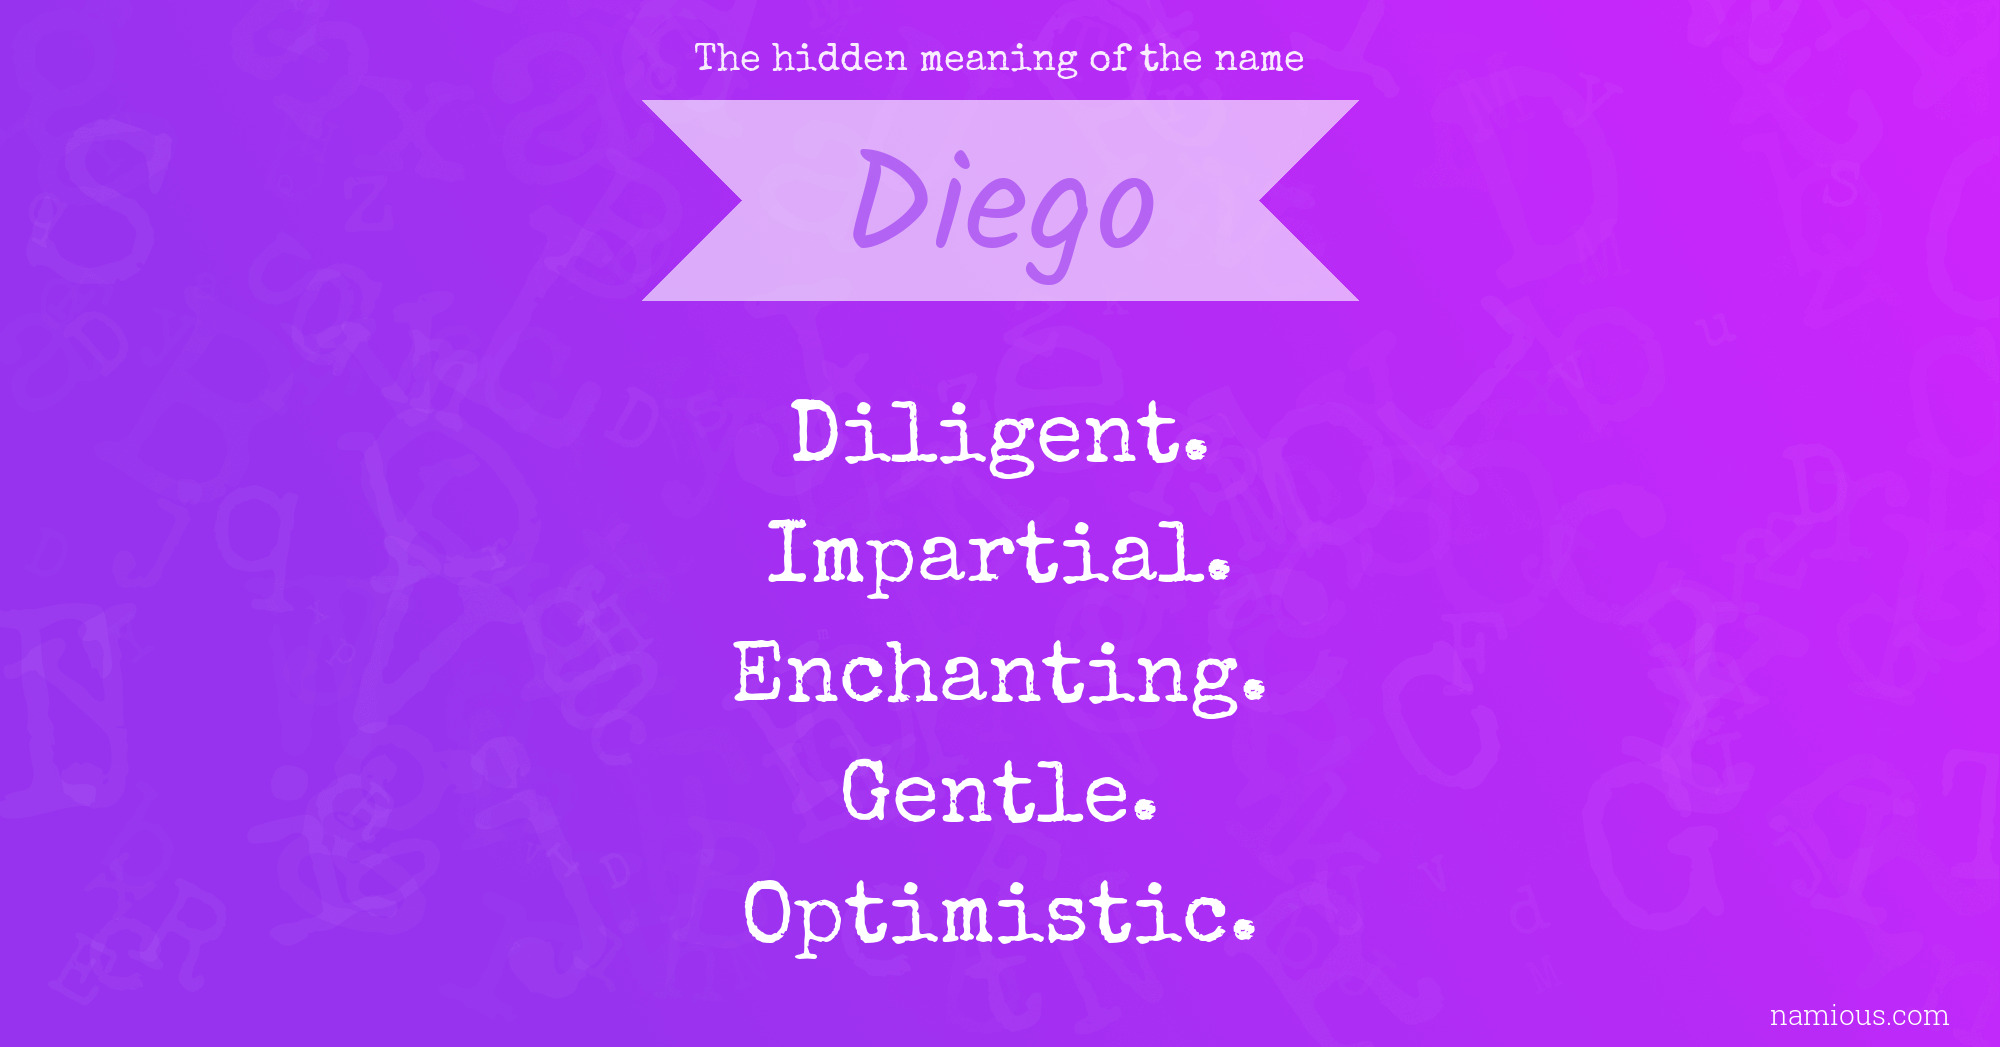 The hidden meaning of the name Diego